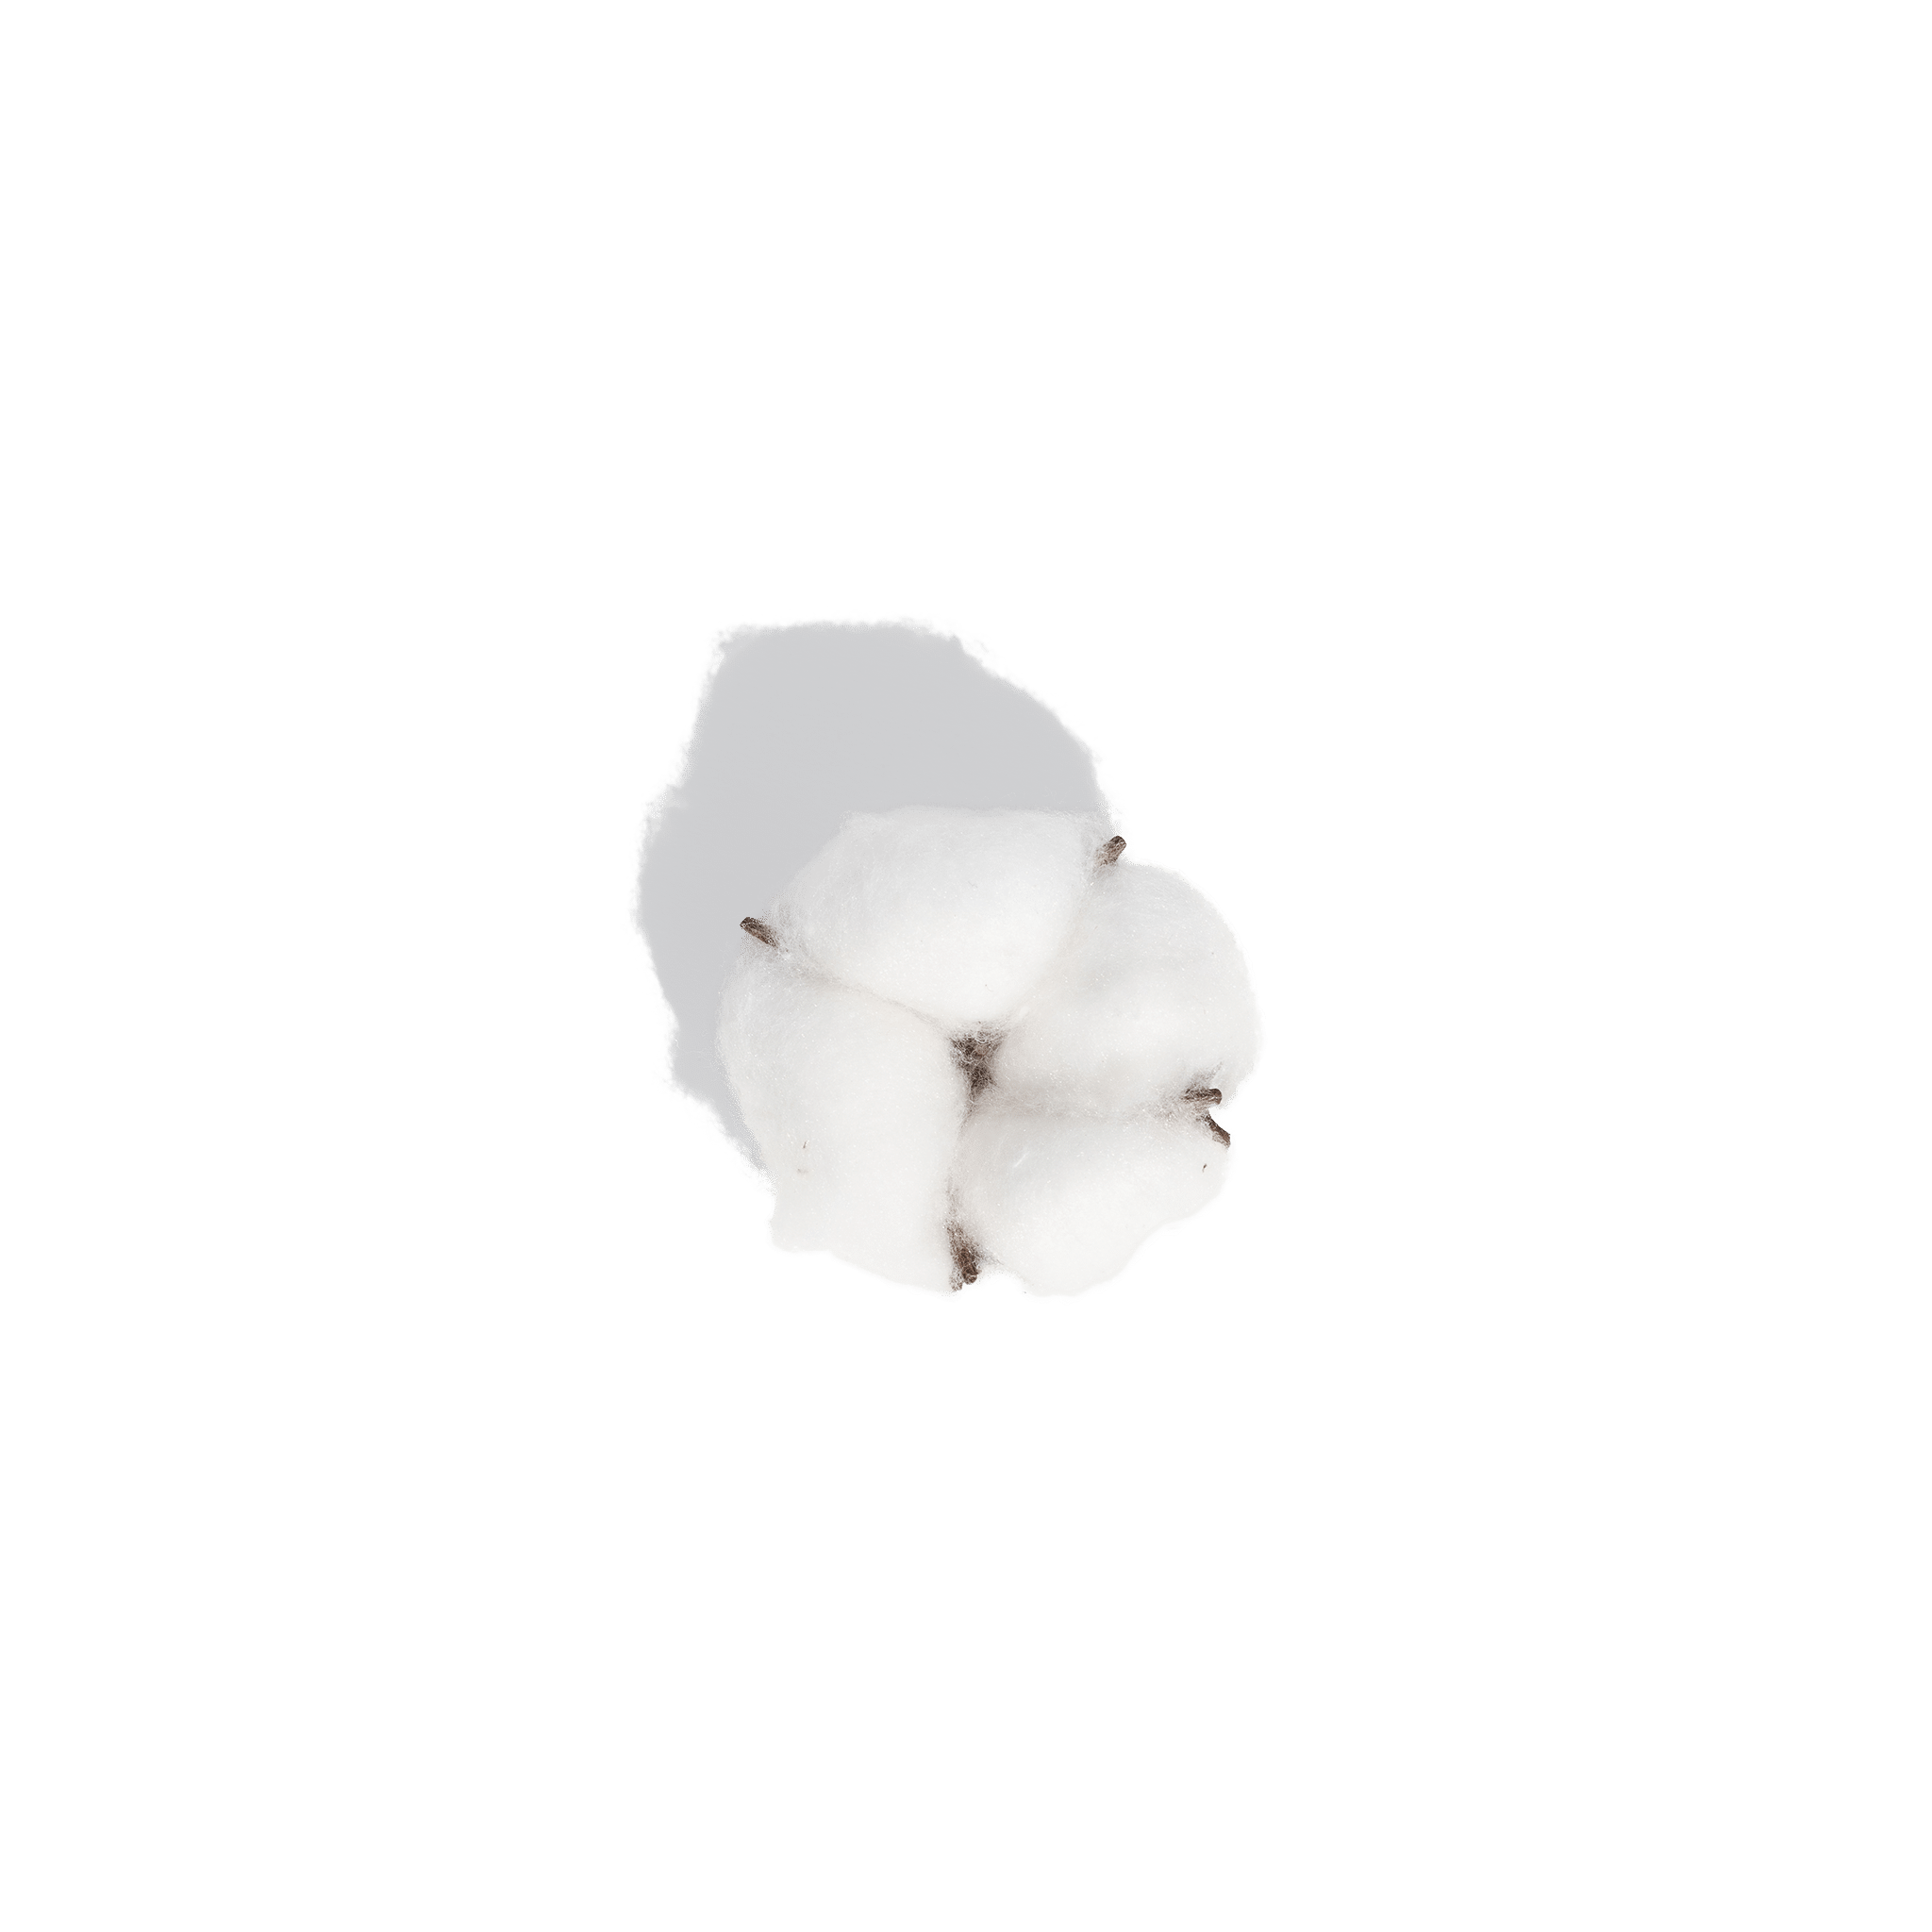 The dirty truth behind your cotton pads – BYKURAHOME